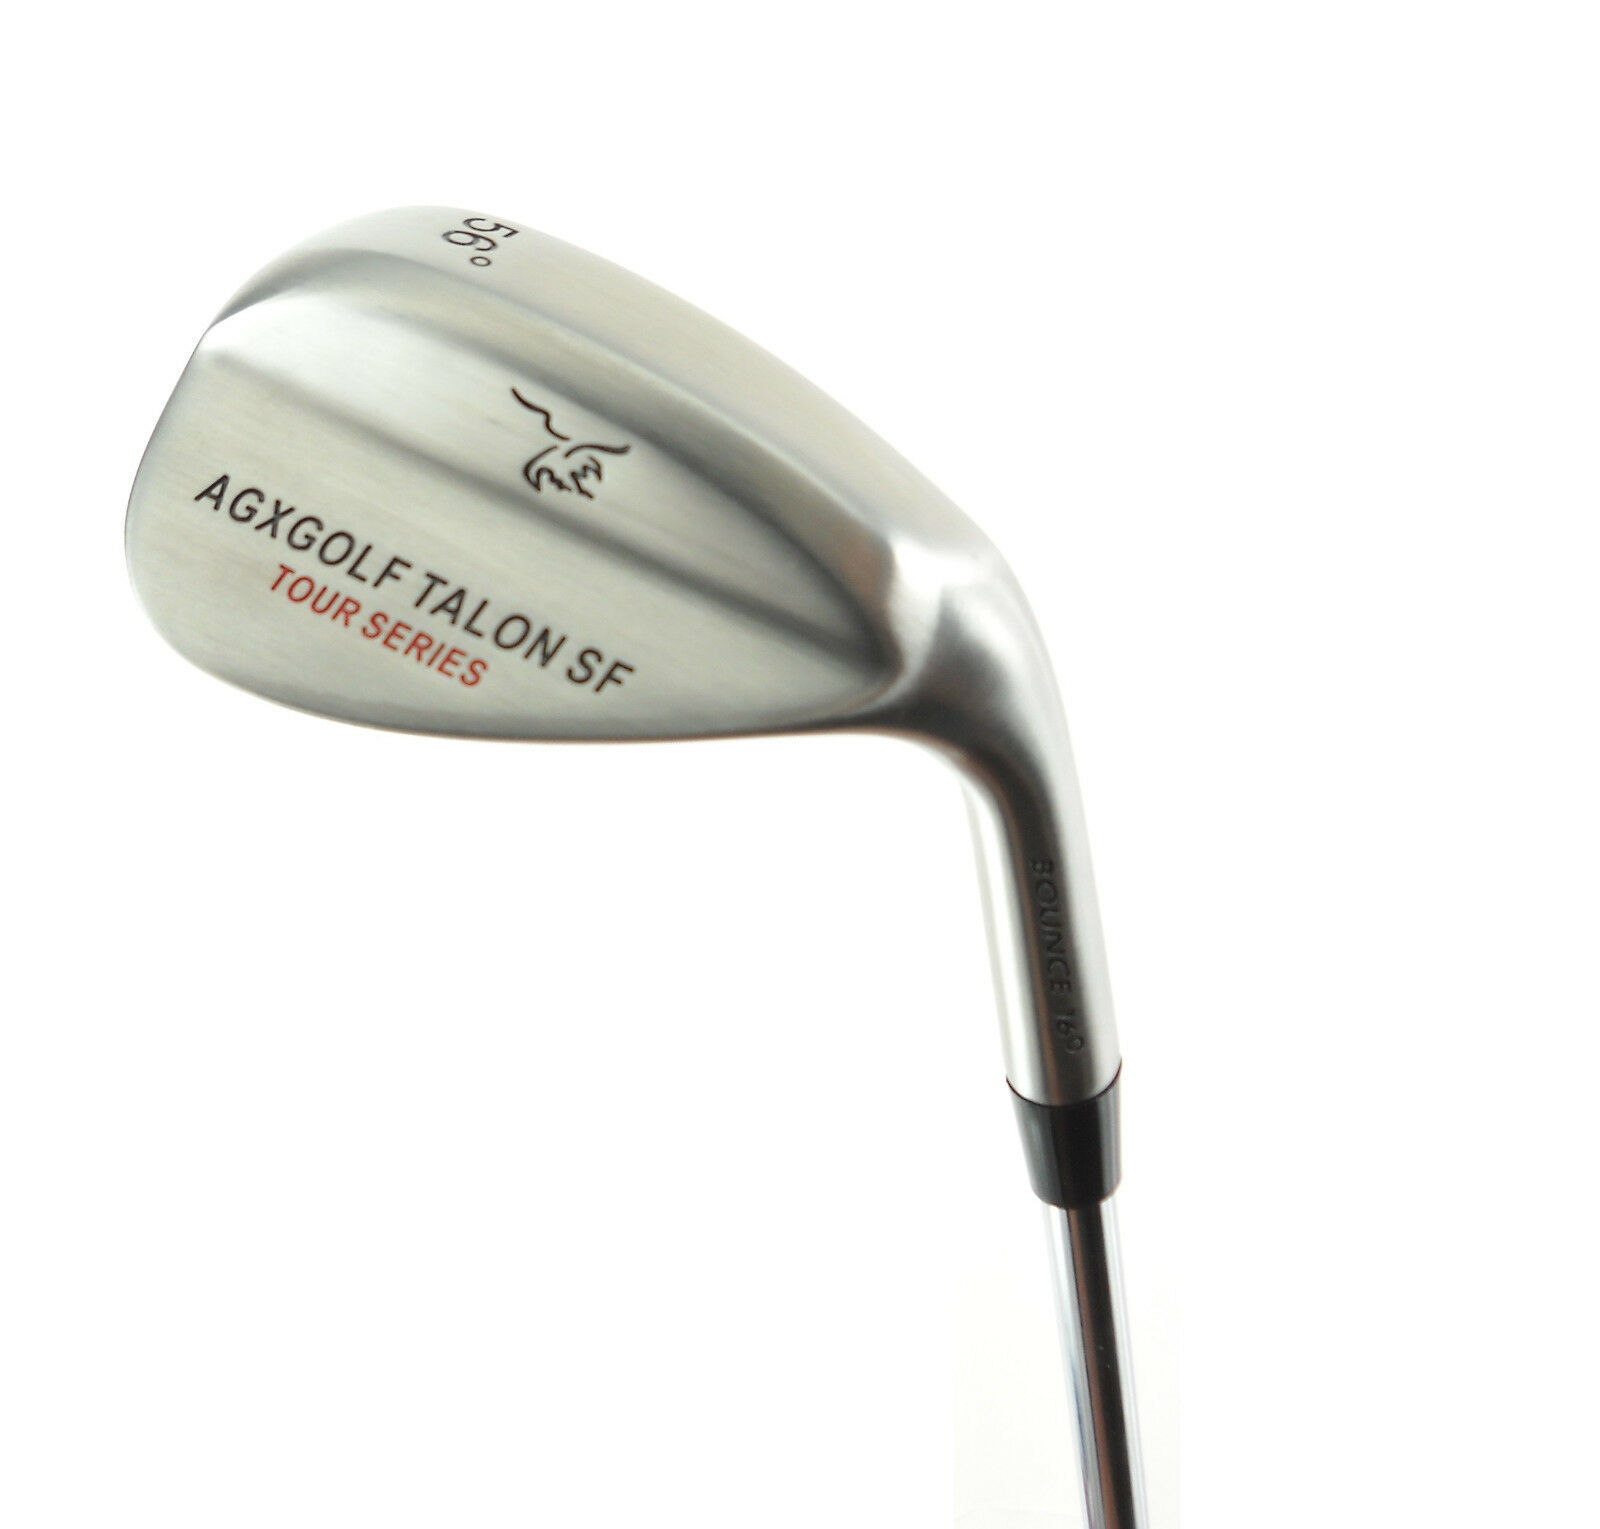 MENS RIGHT HAND, 56° SAND WEDGE SOFT FACE ALL SIZES: U.S.A. - $34.95